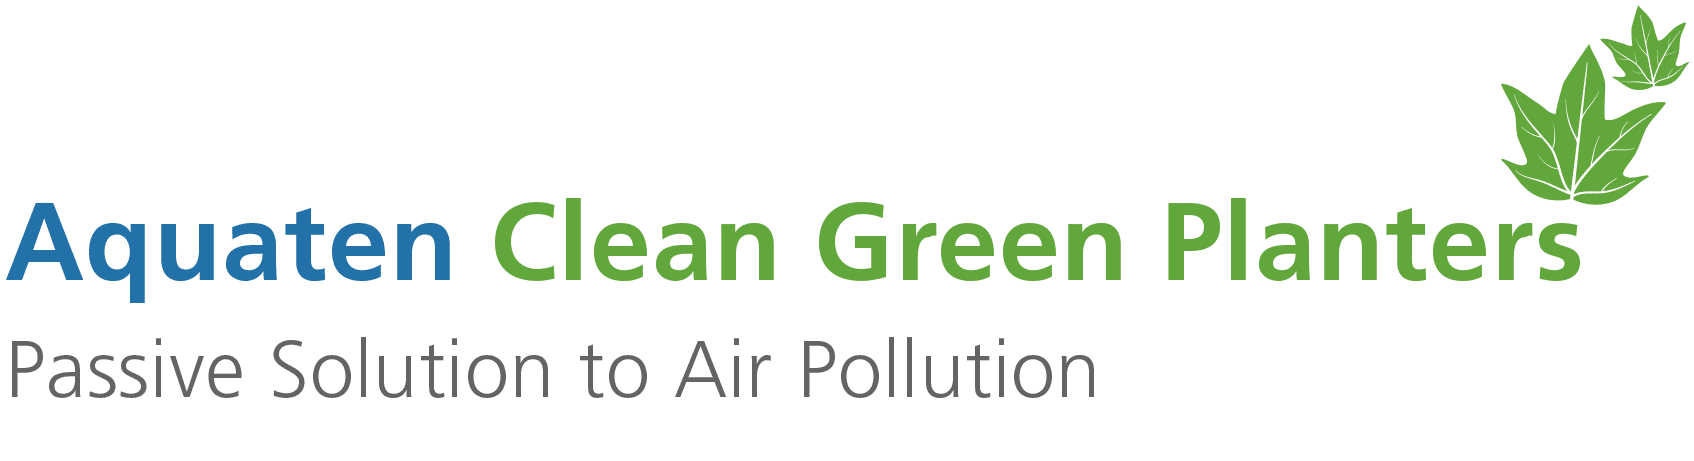 Aquaten Clean Green Planters - Passive Solution to Air Pollution